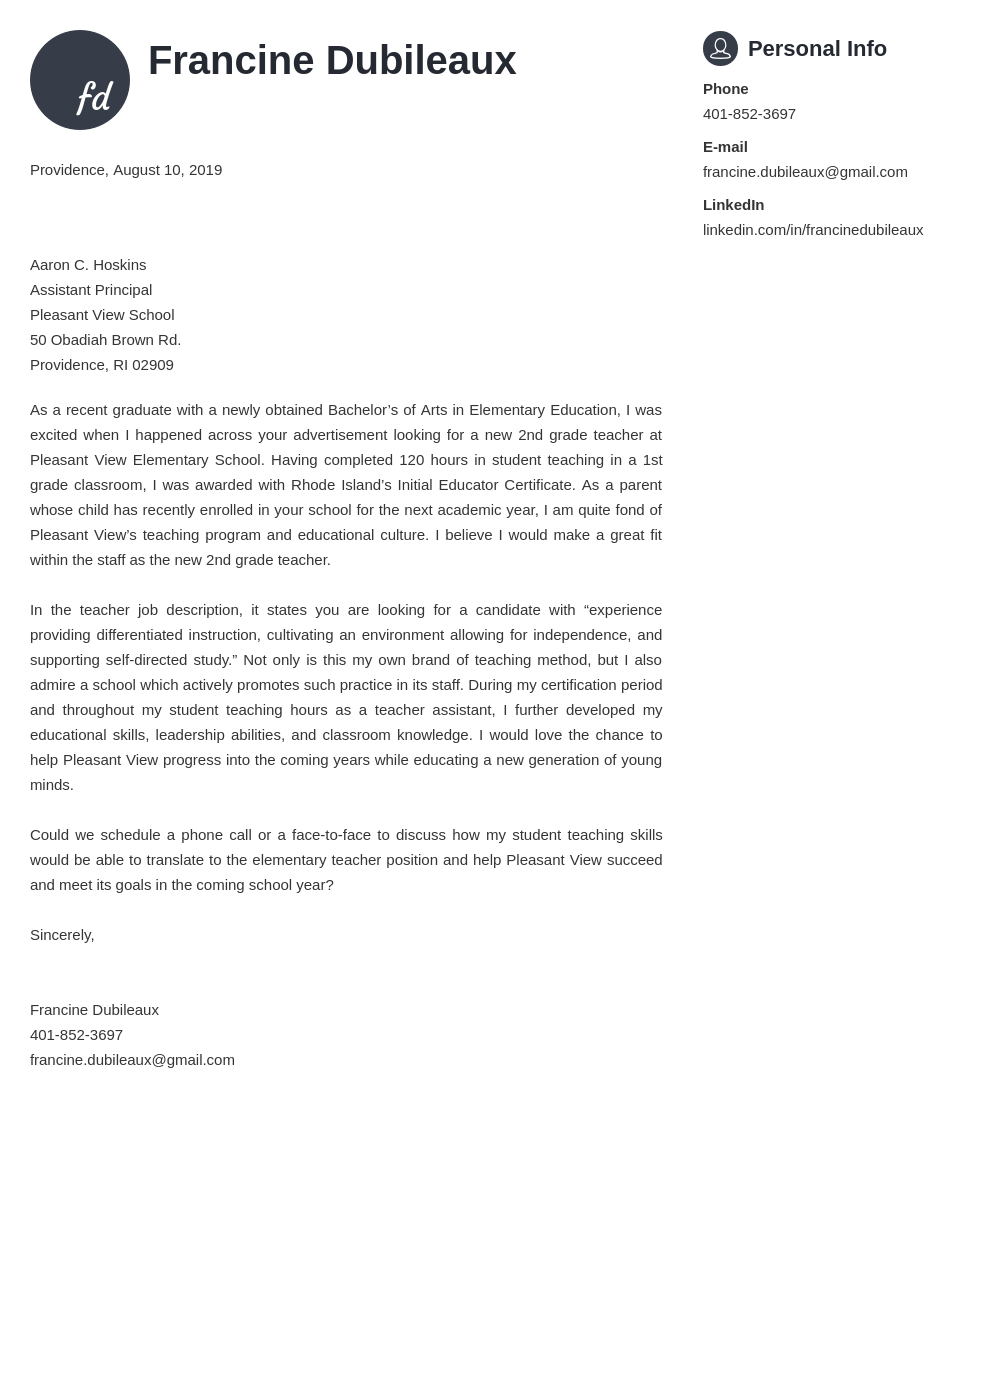 Short Cover Letter For Teaching Job - Knowing And Sharing (990 x 1400 Pixel)